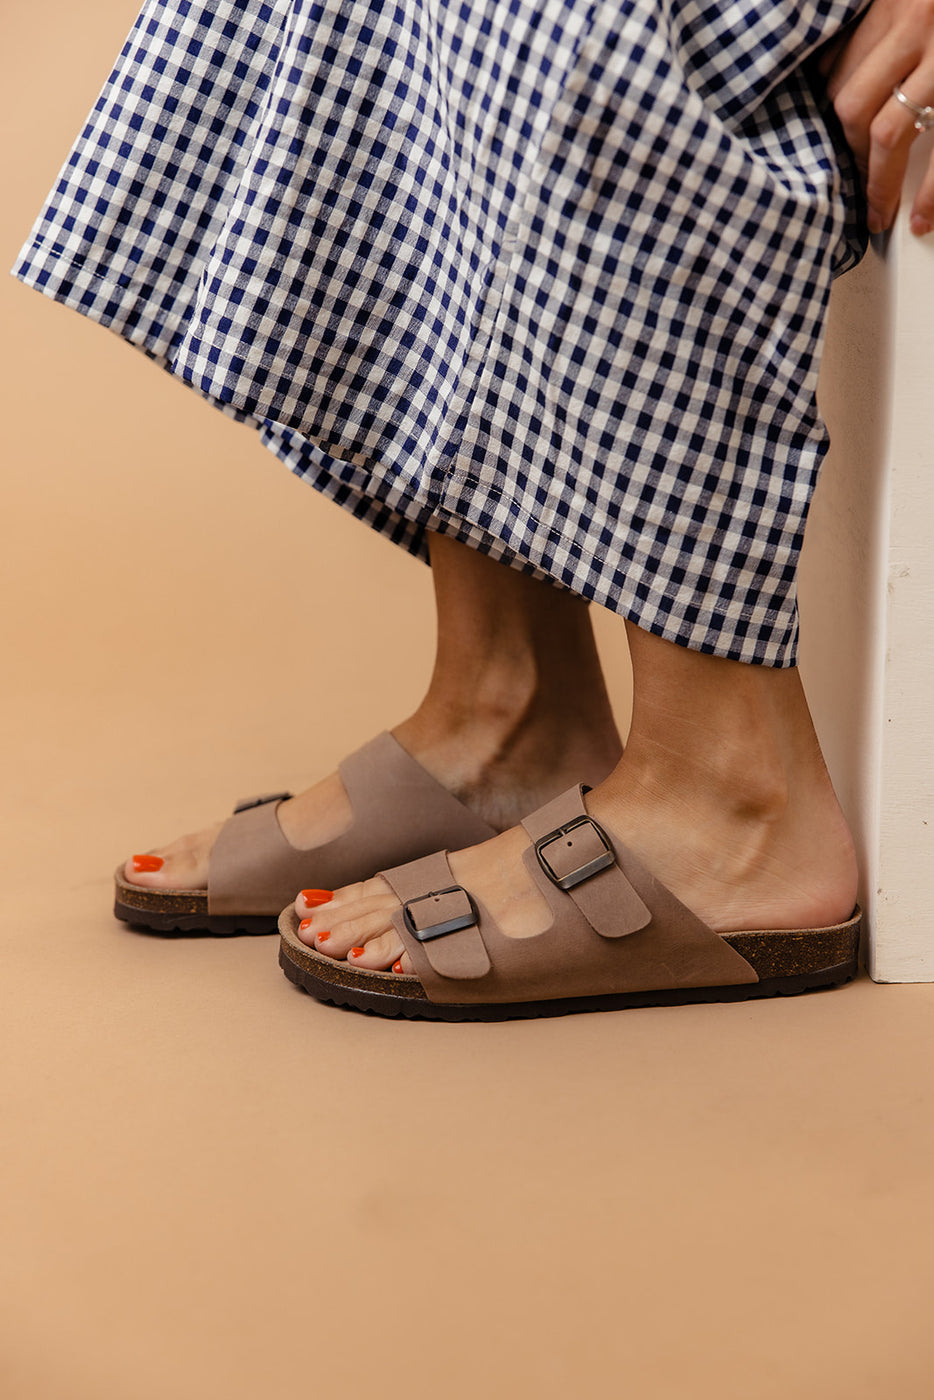 a person's feet in sandals